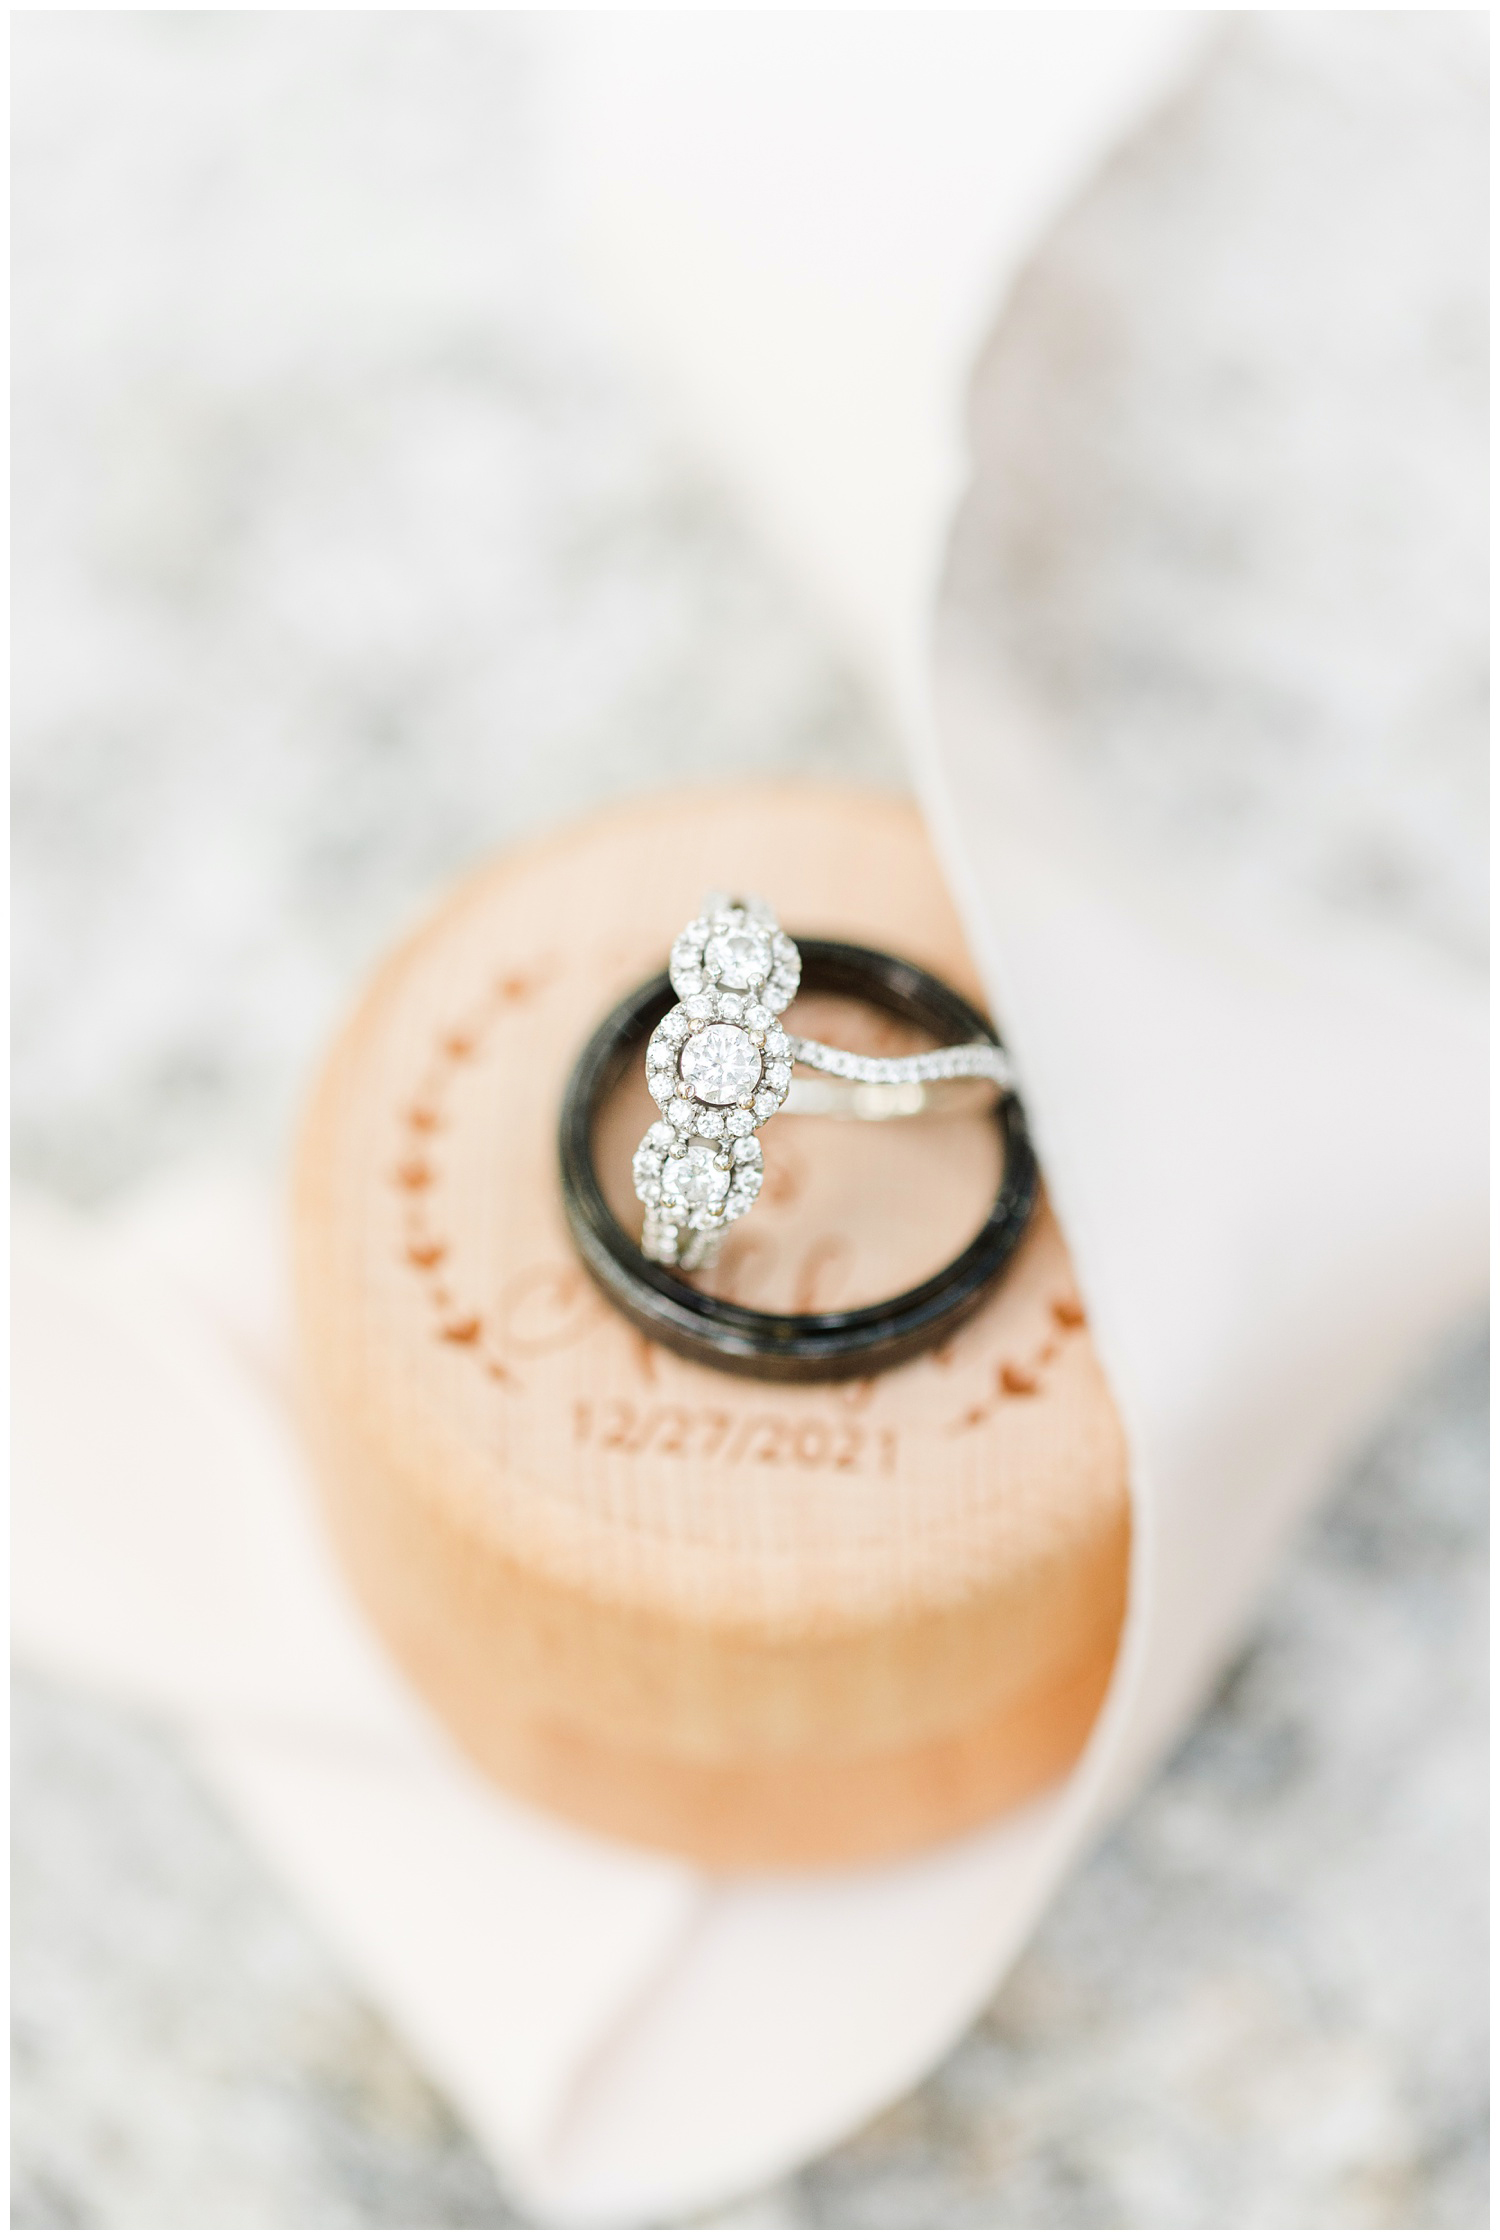 Ashlyn and Thad's three stone wedding bands sit on top of a custom monogrammed wooden ring box | CB Studio